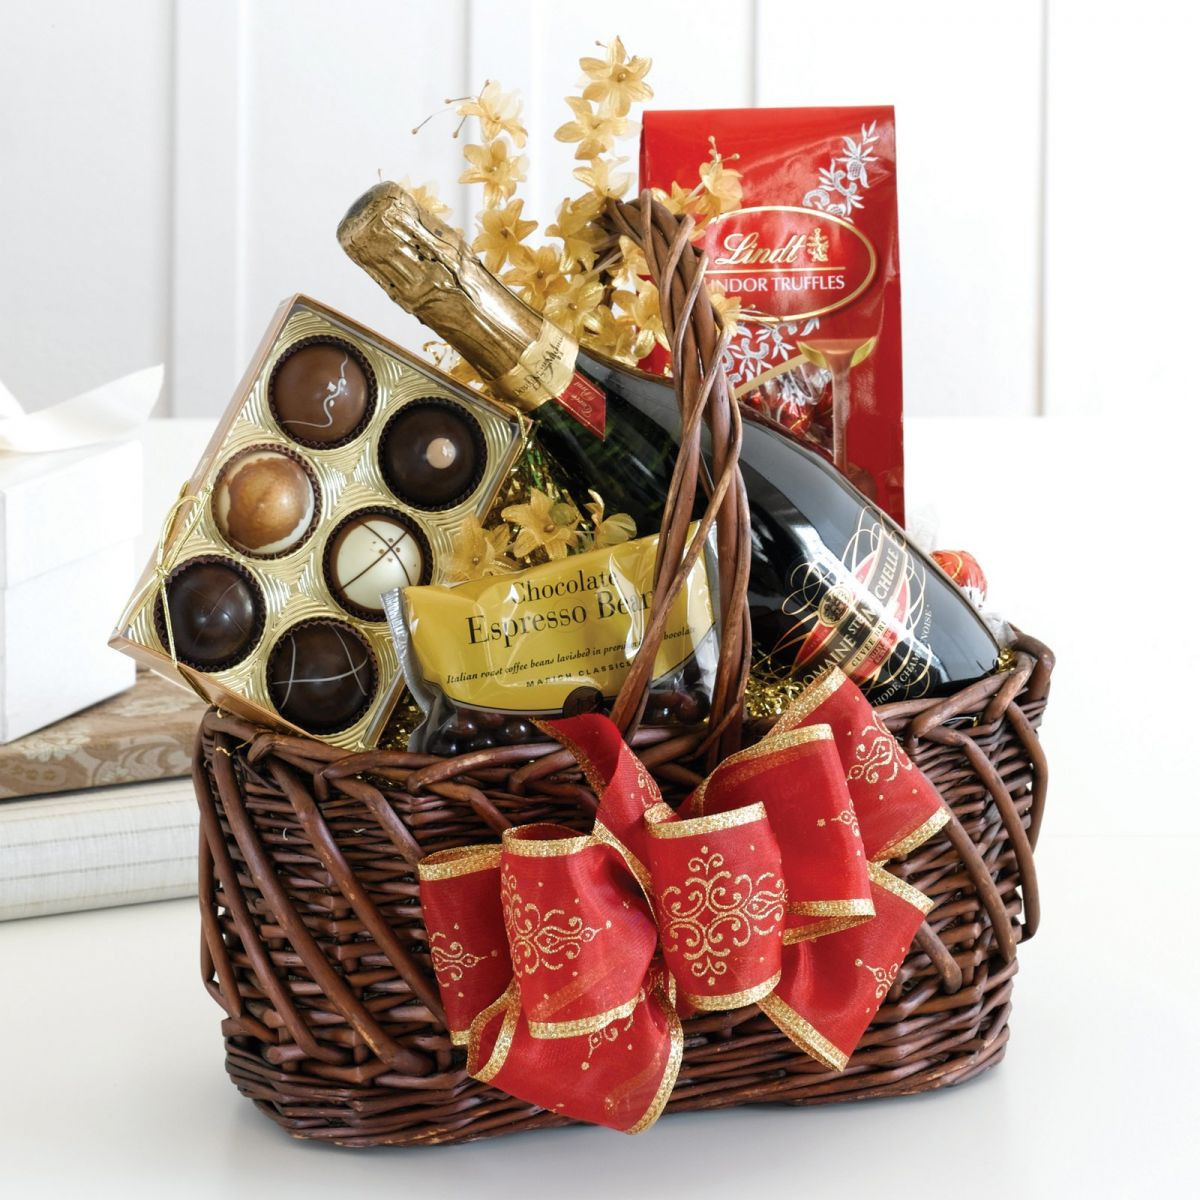 New Christmas Gift Ideas
 17 Baskets Anomalous n Some Classic Christmas Gift Hamper